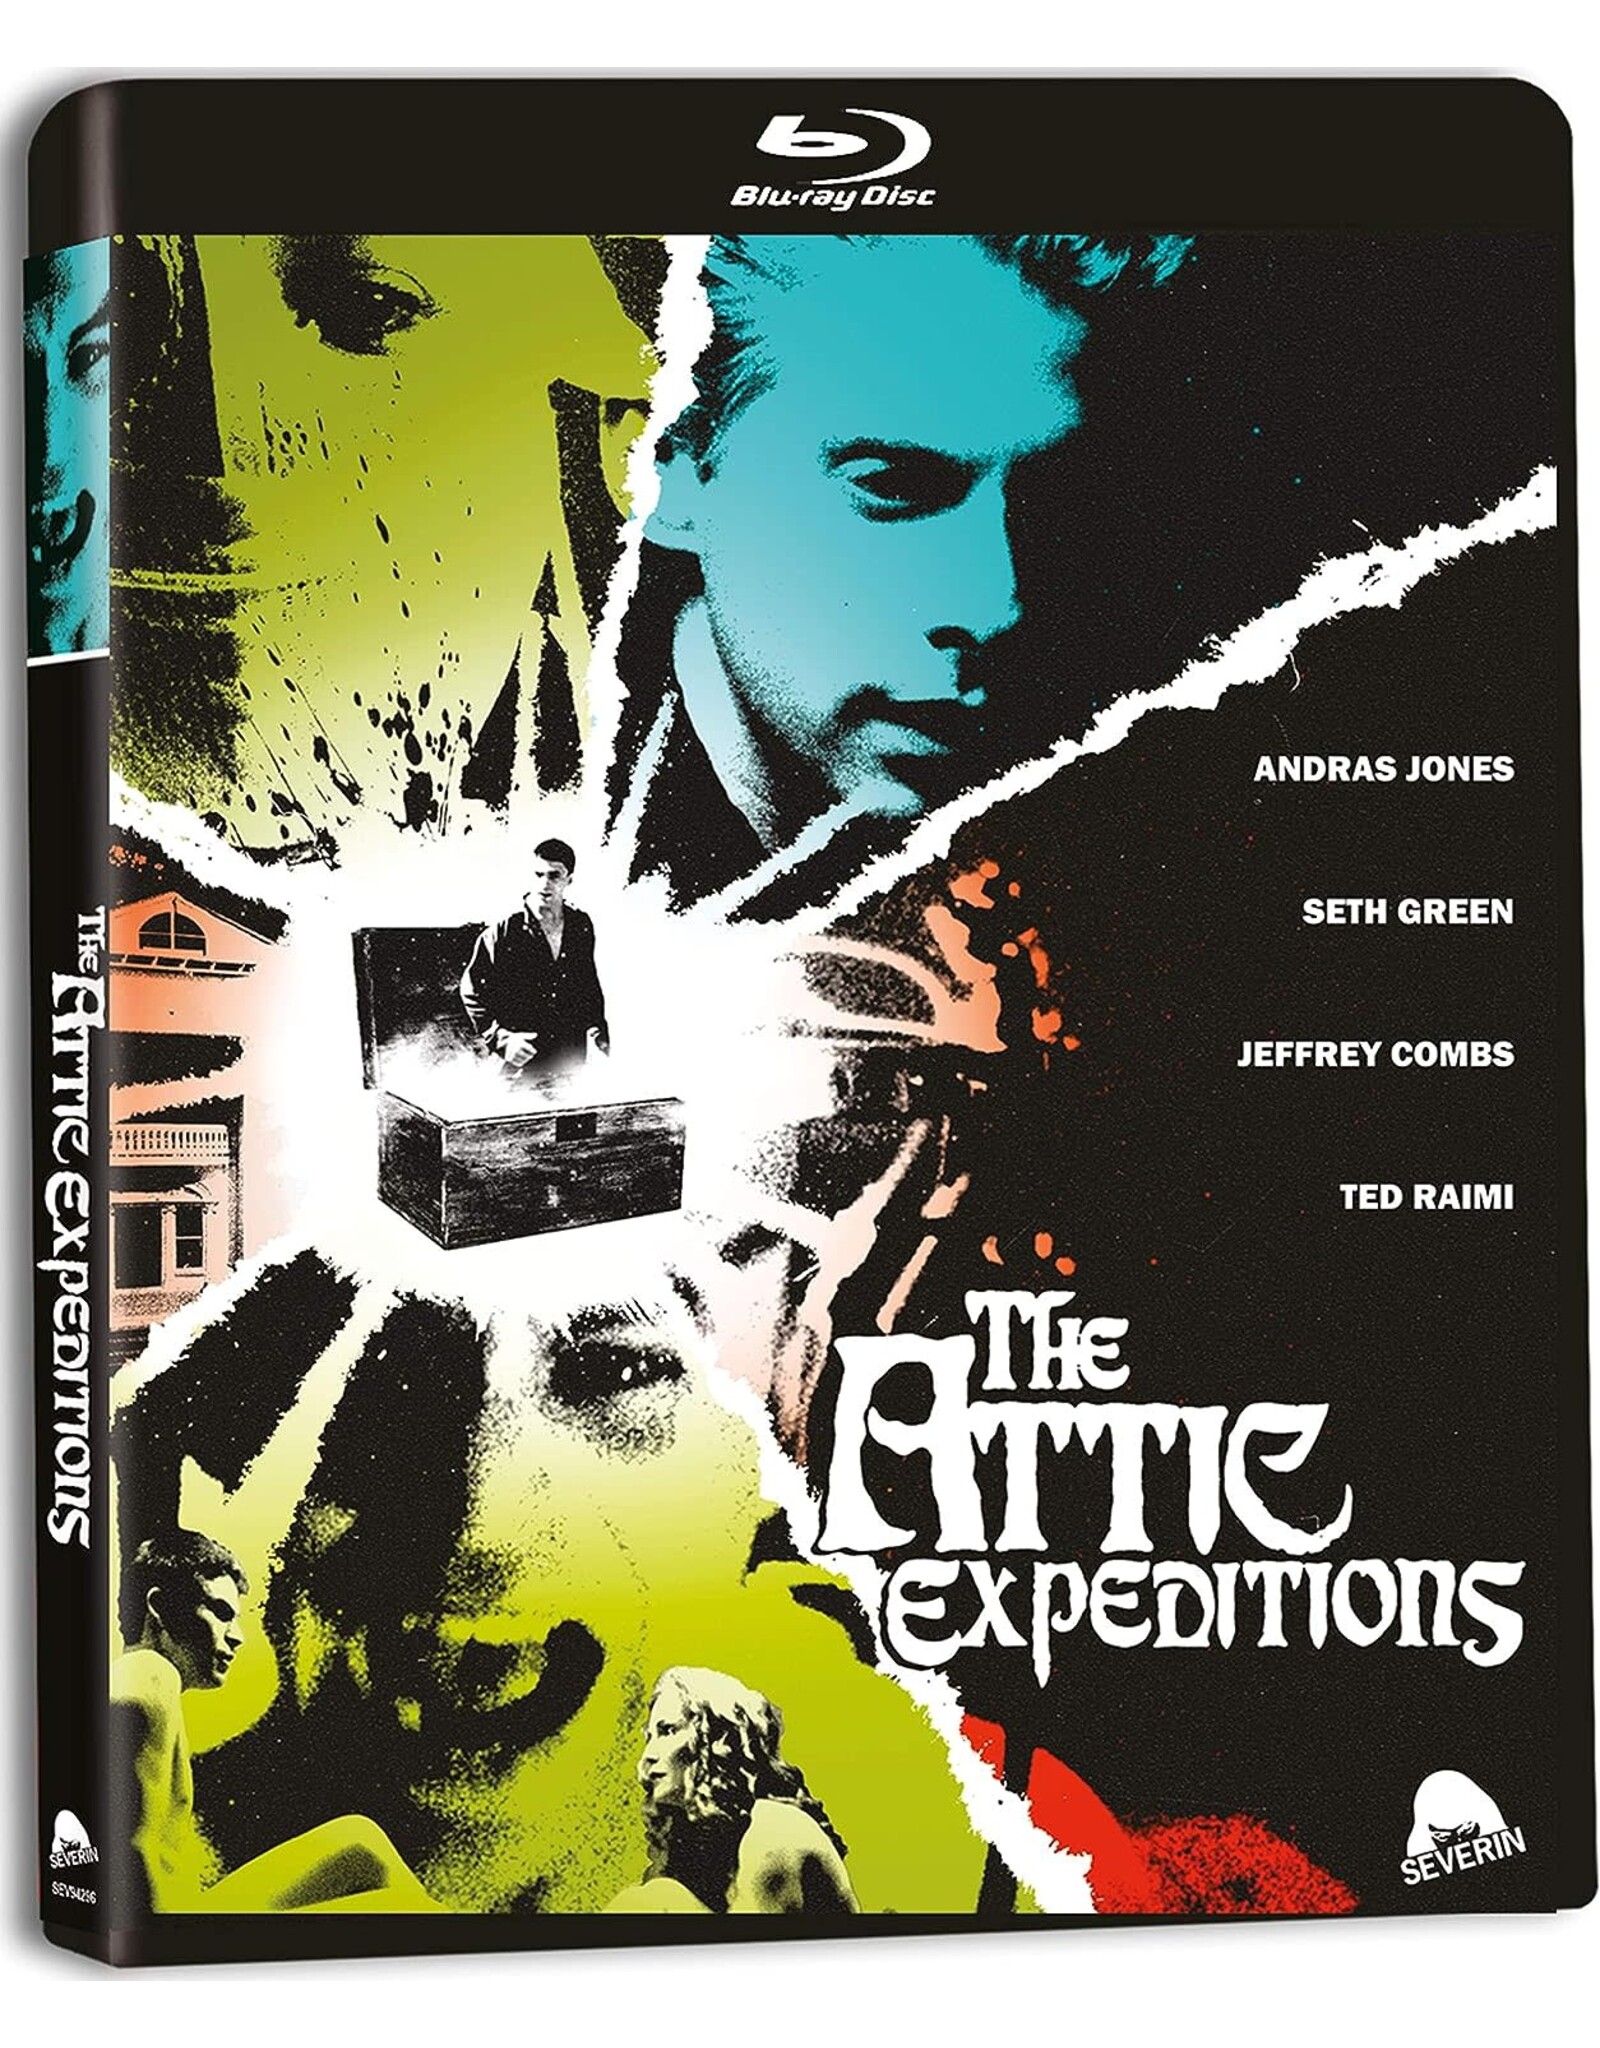 Horror Attic Expeditions, The - Severin (Used)